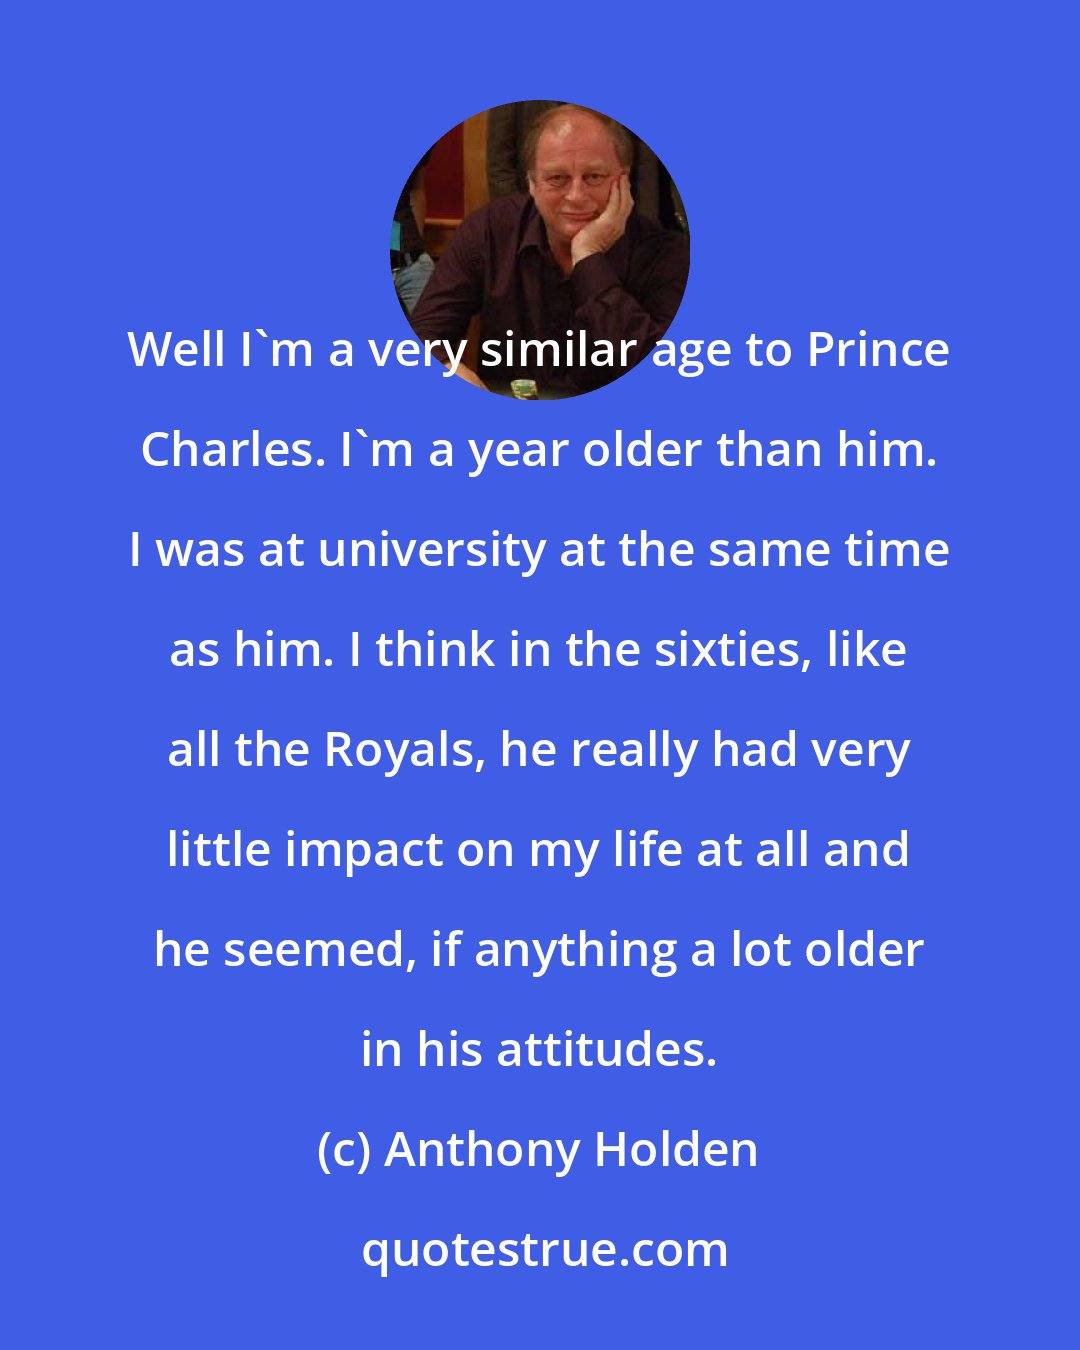 Anthony Holden: Well I'm a very similar age to Prince Charles. I'm a year older than him. I was at university at the same time as him. I think in the sixties, like all the Royals, he really had very little impact on my life at all and he seemed, if anything a lot older in his attitudes.